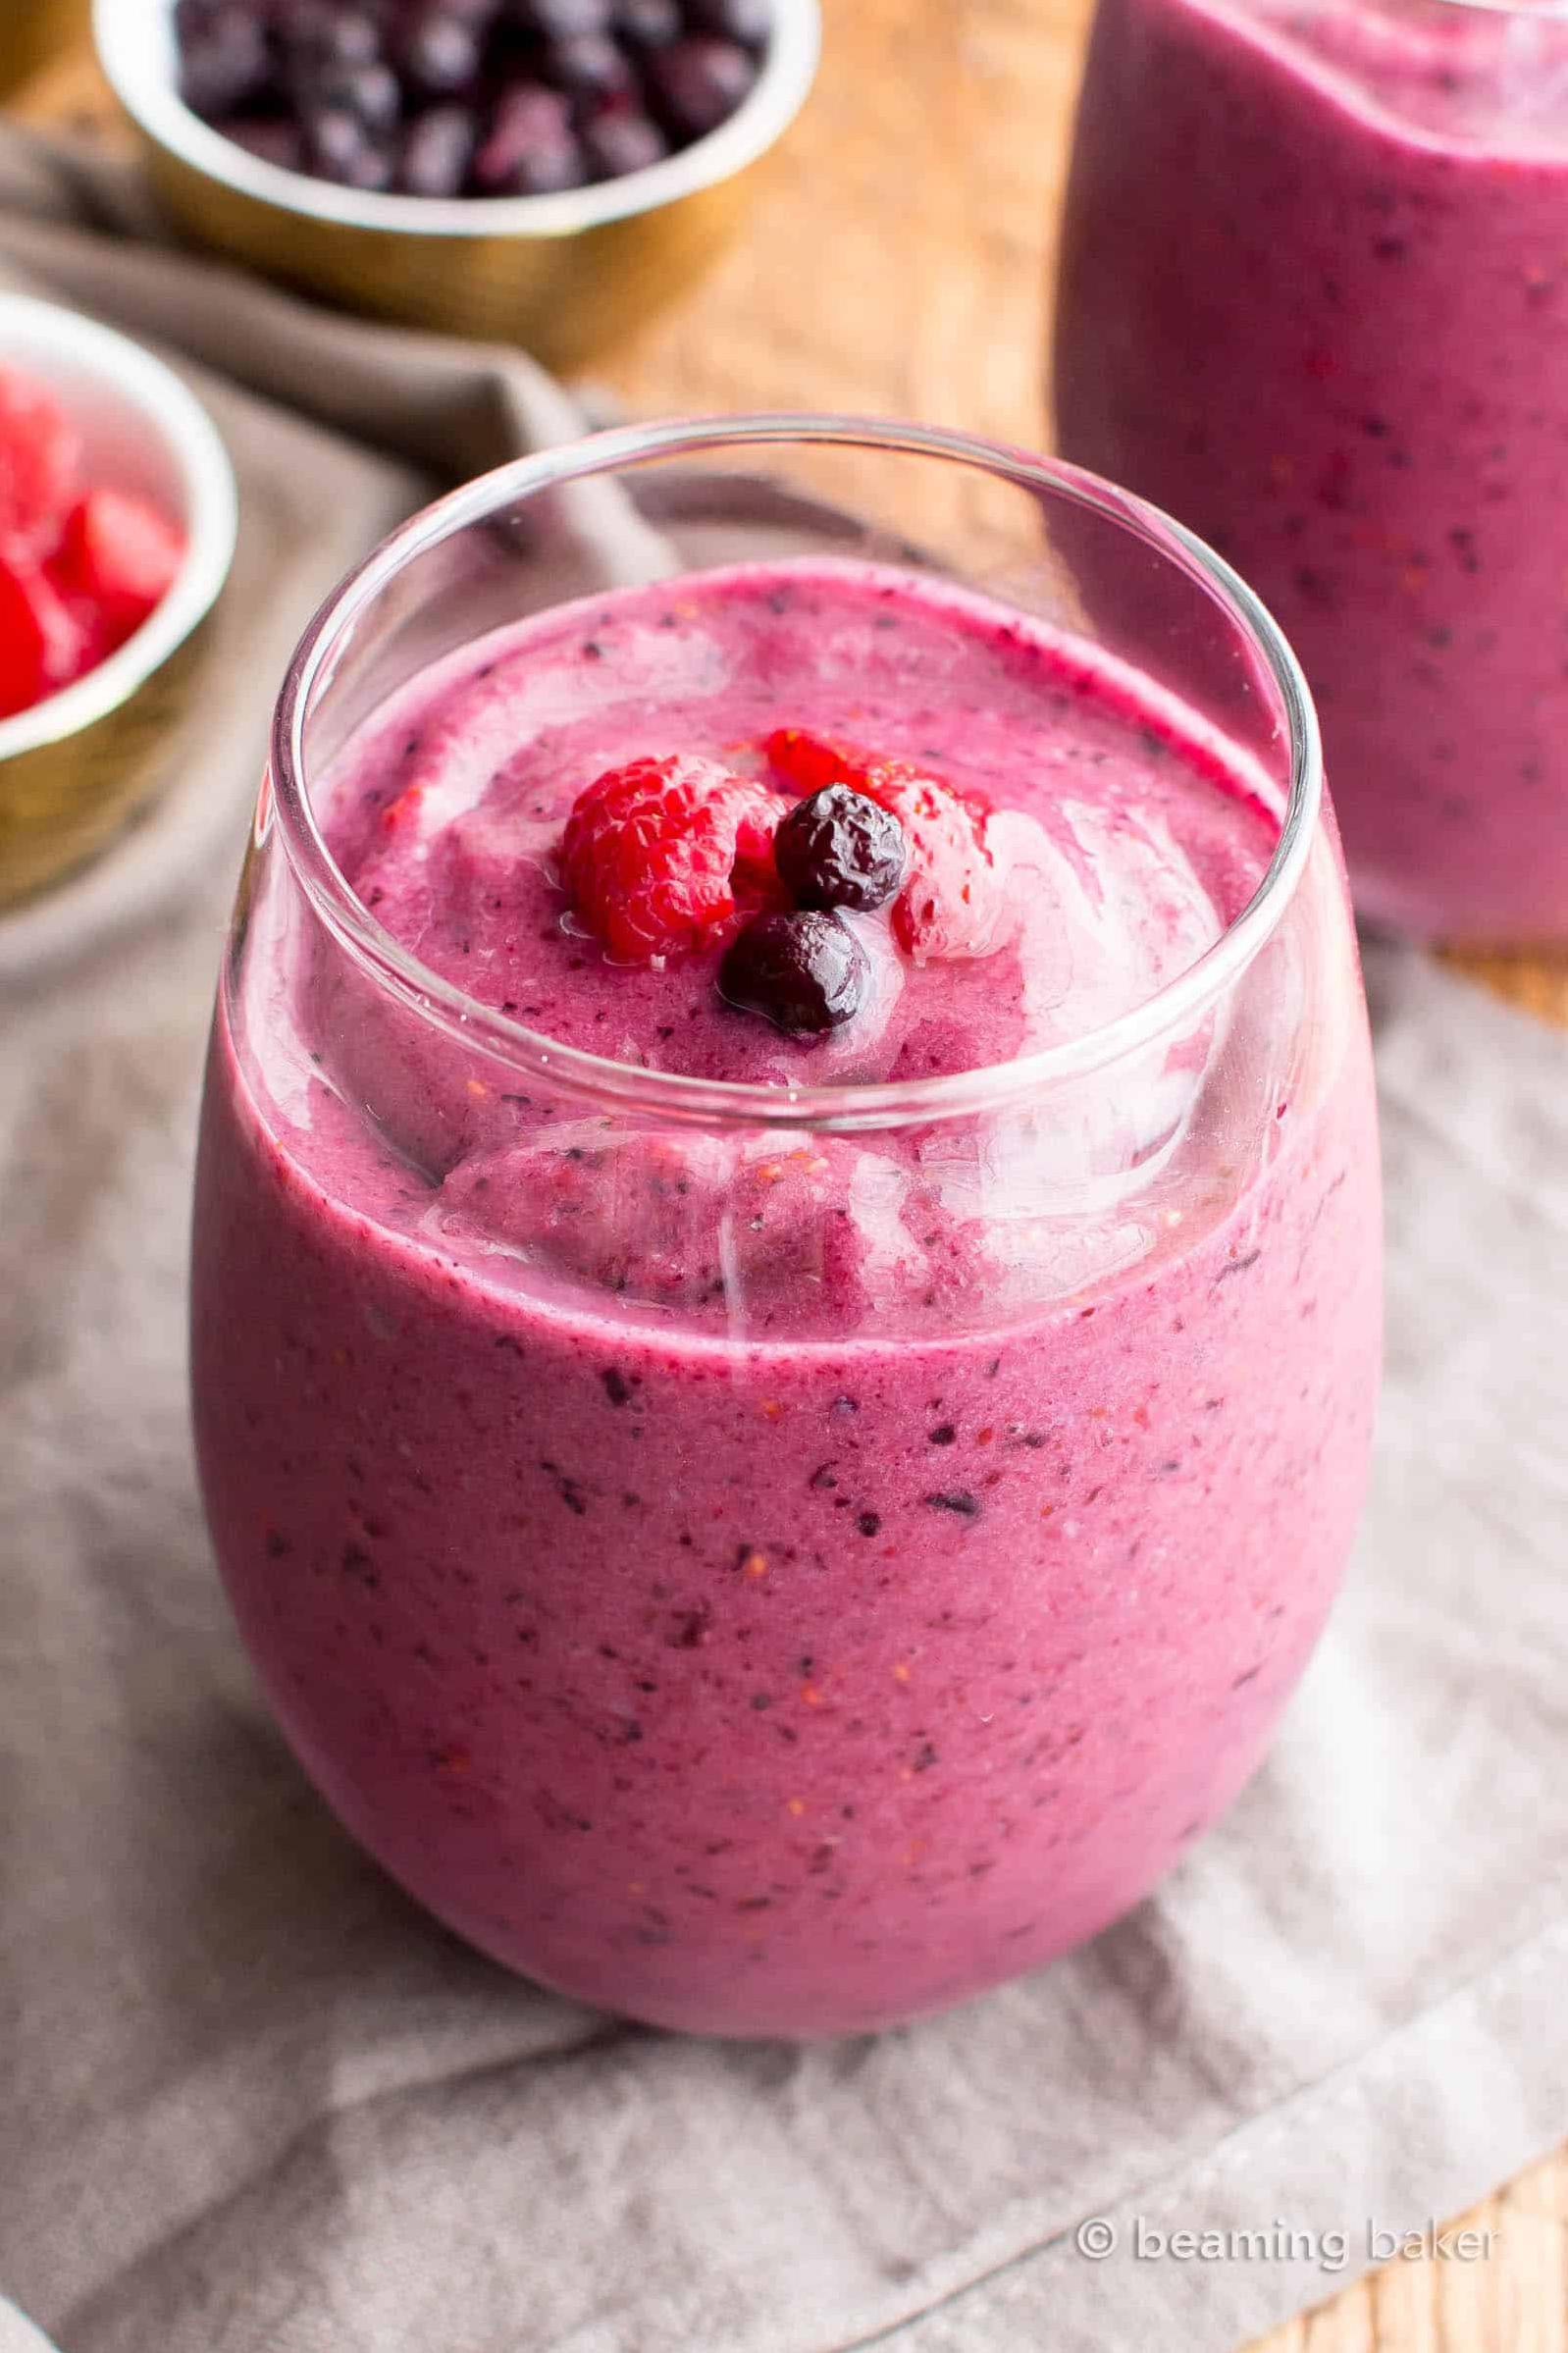  A dairy-free smoothie to nourish your body and soul